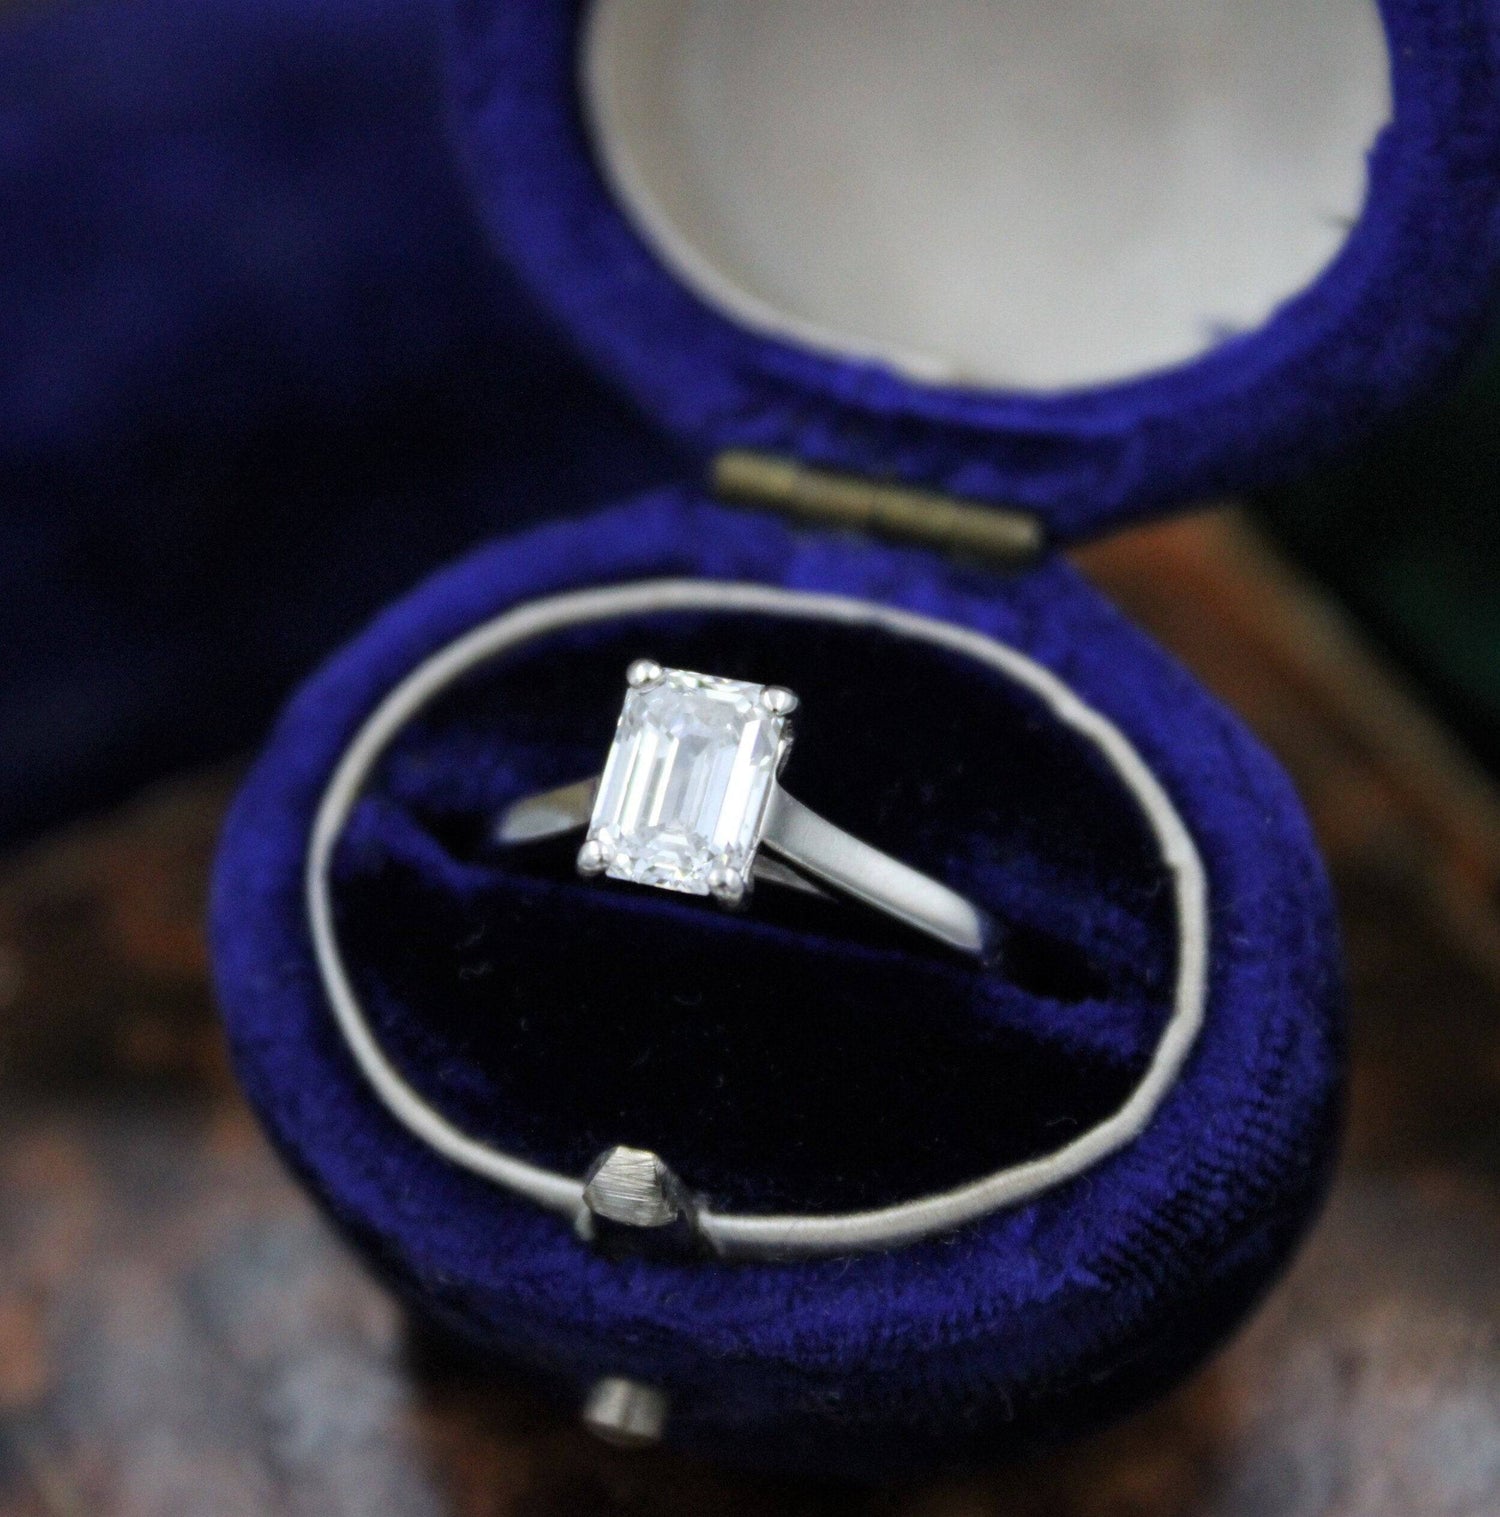 A very fine 0.91ct Emerald Cut Diamond Solitaire Ring mounted in Platinum, Pre-owned - Robin Haydock Antiques